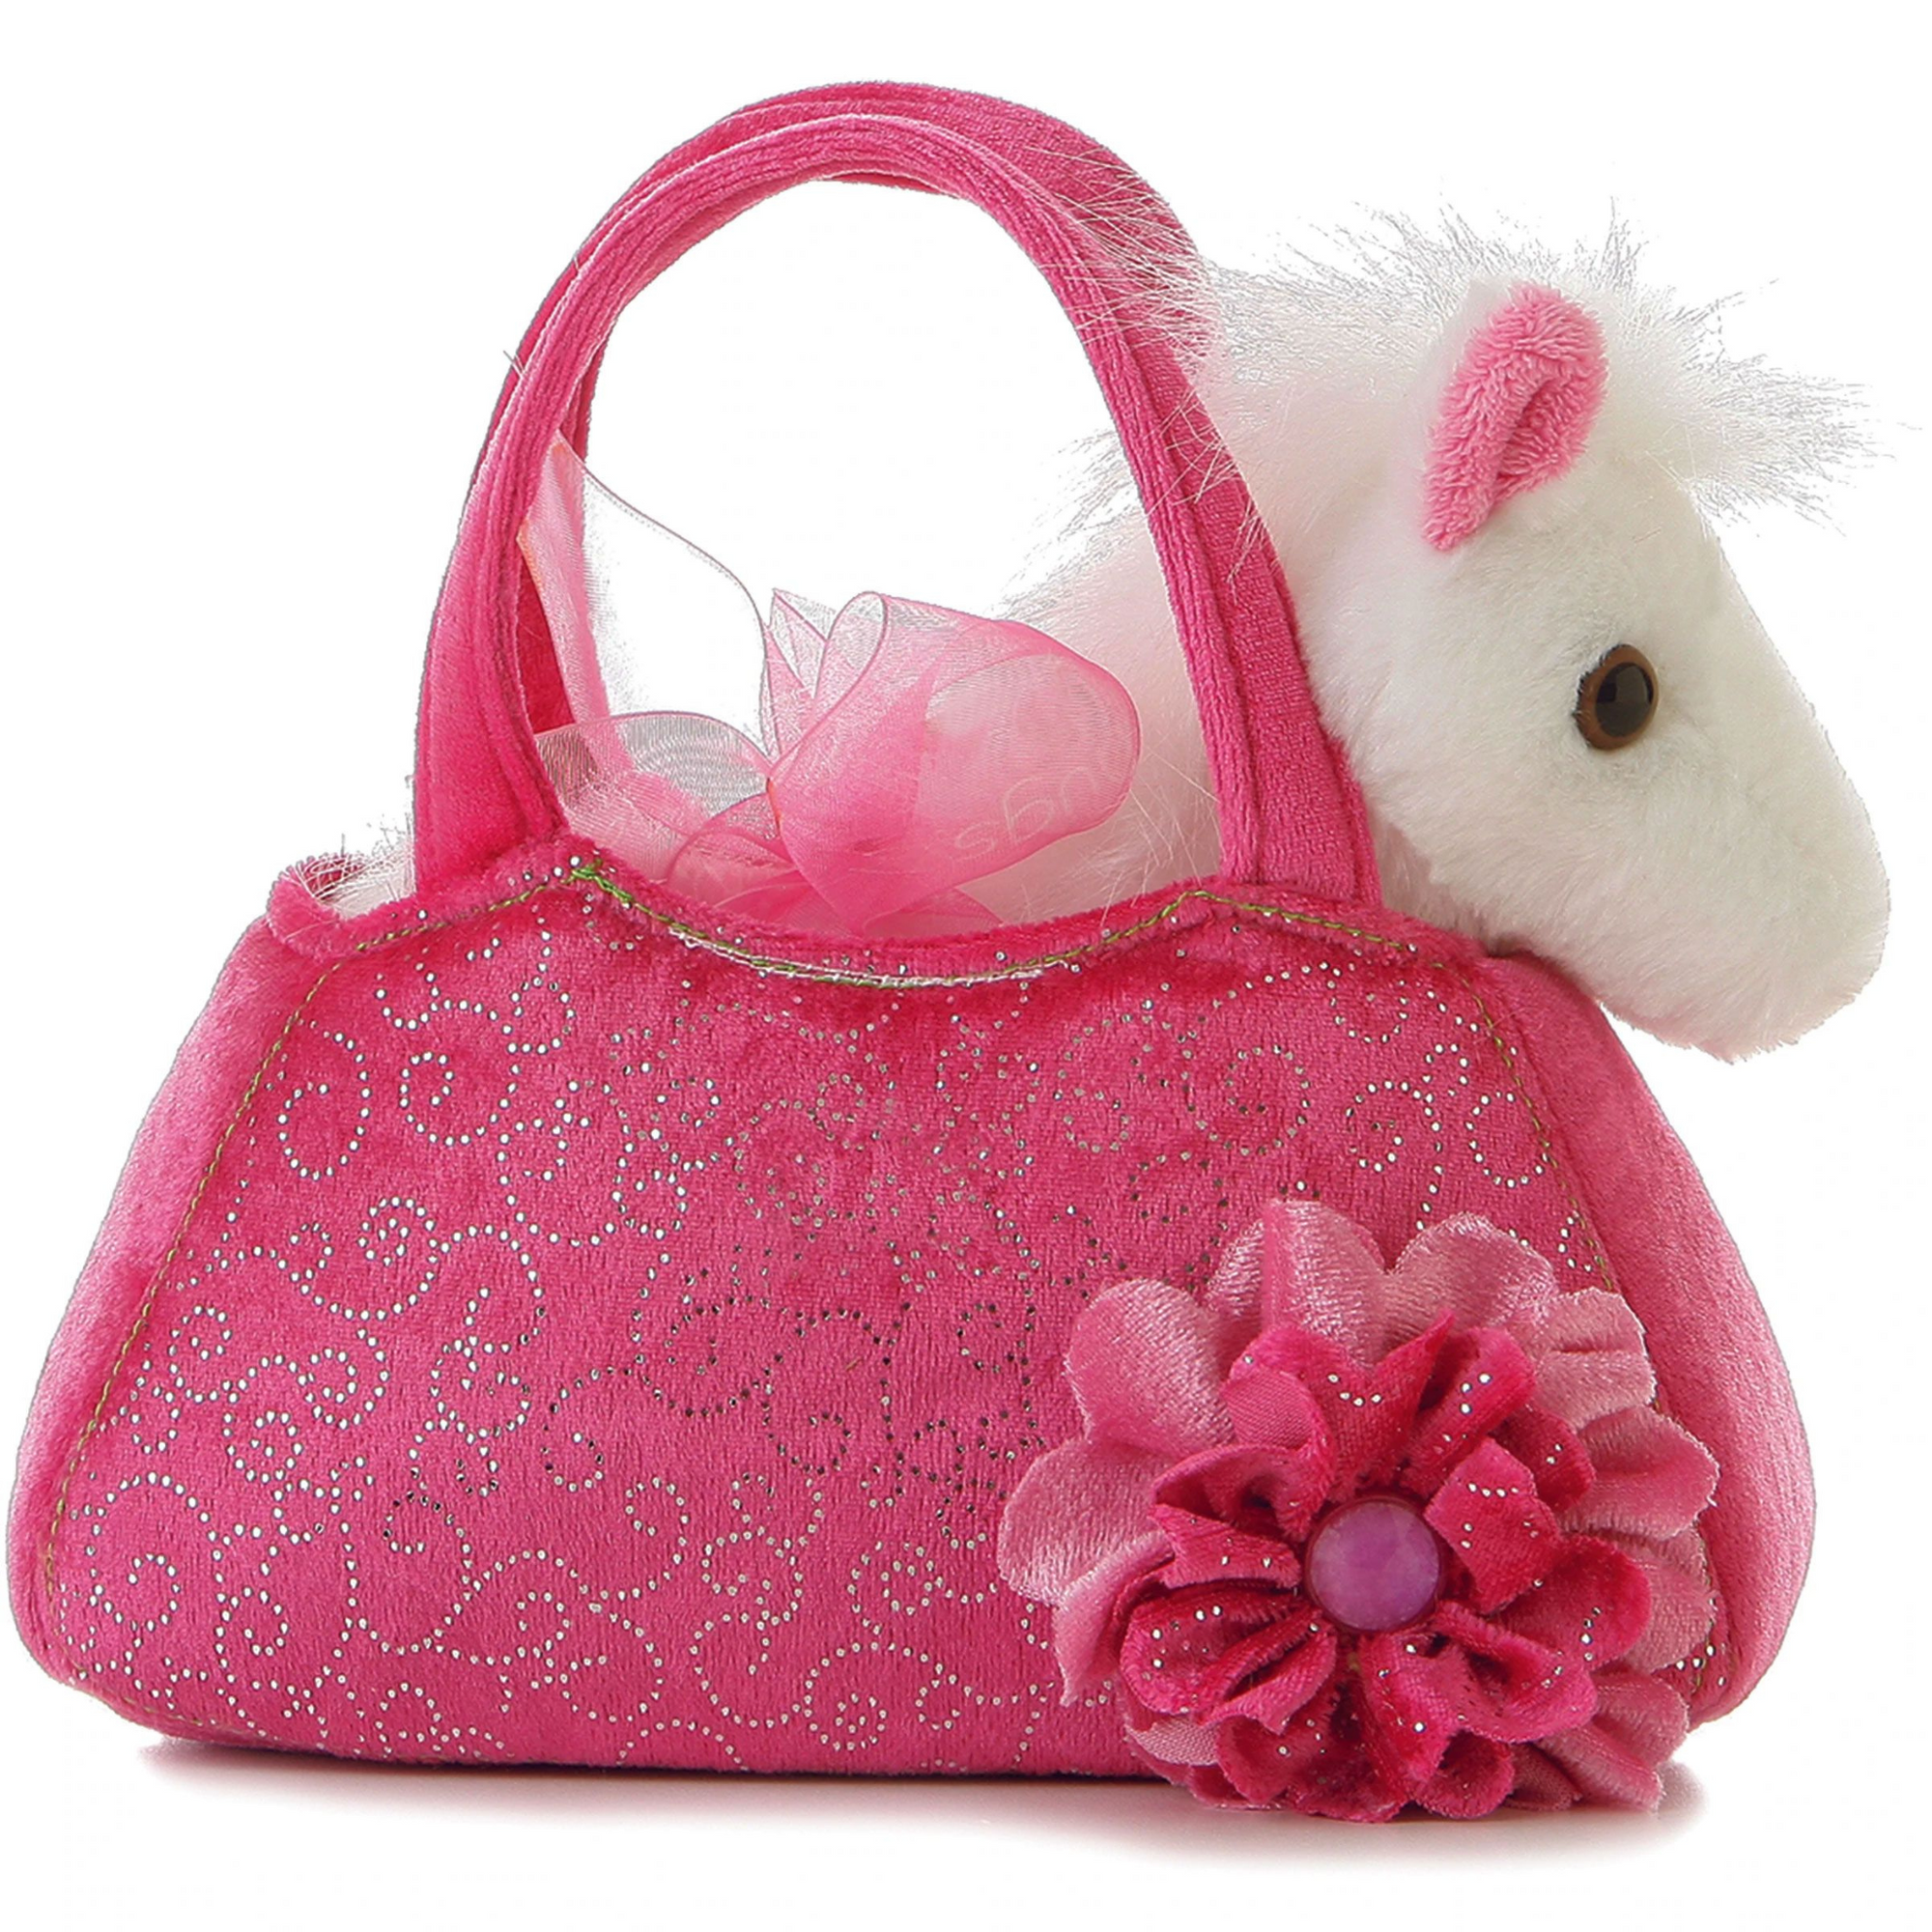 Fancy Pals Pony in a Pink Bag